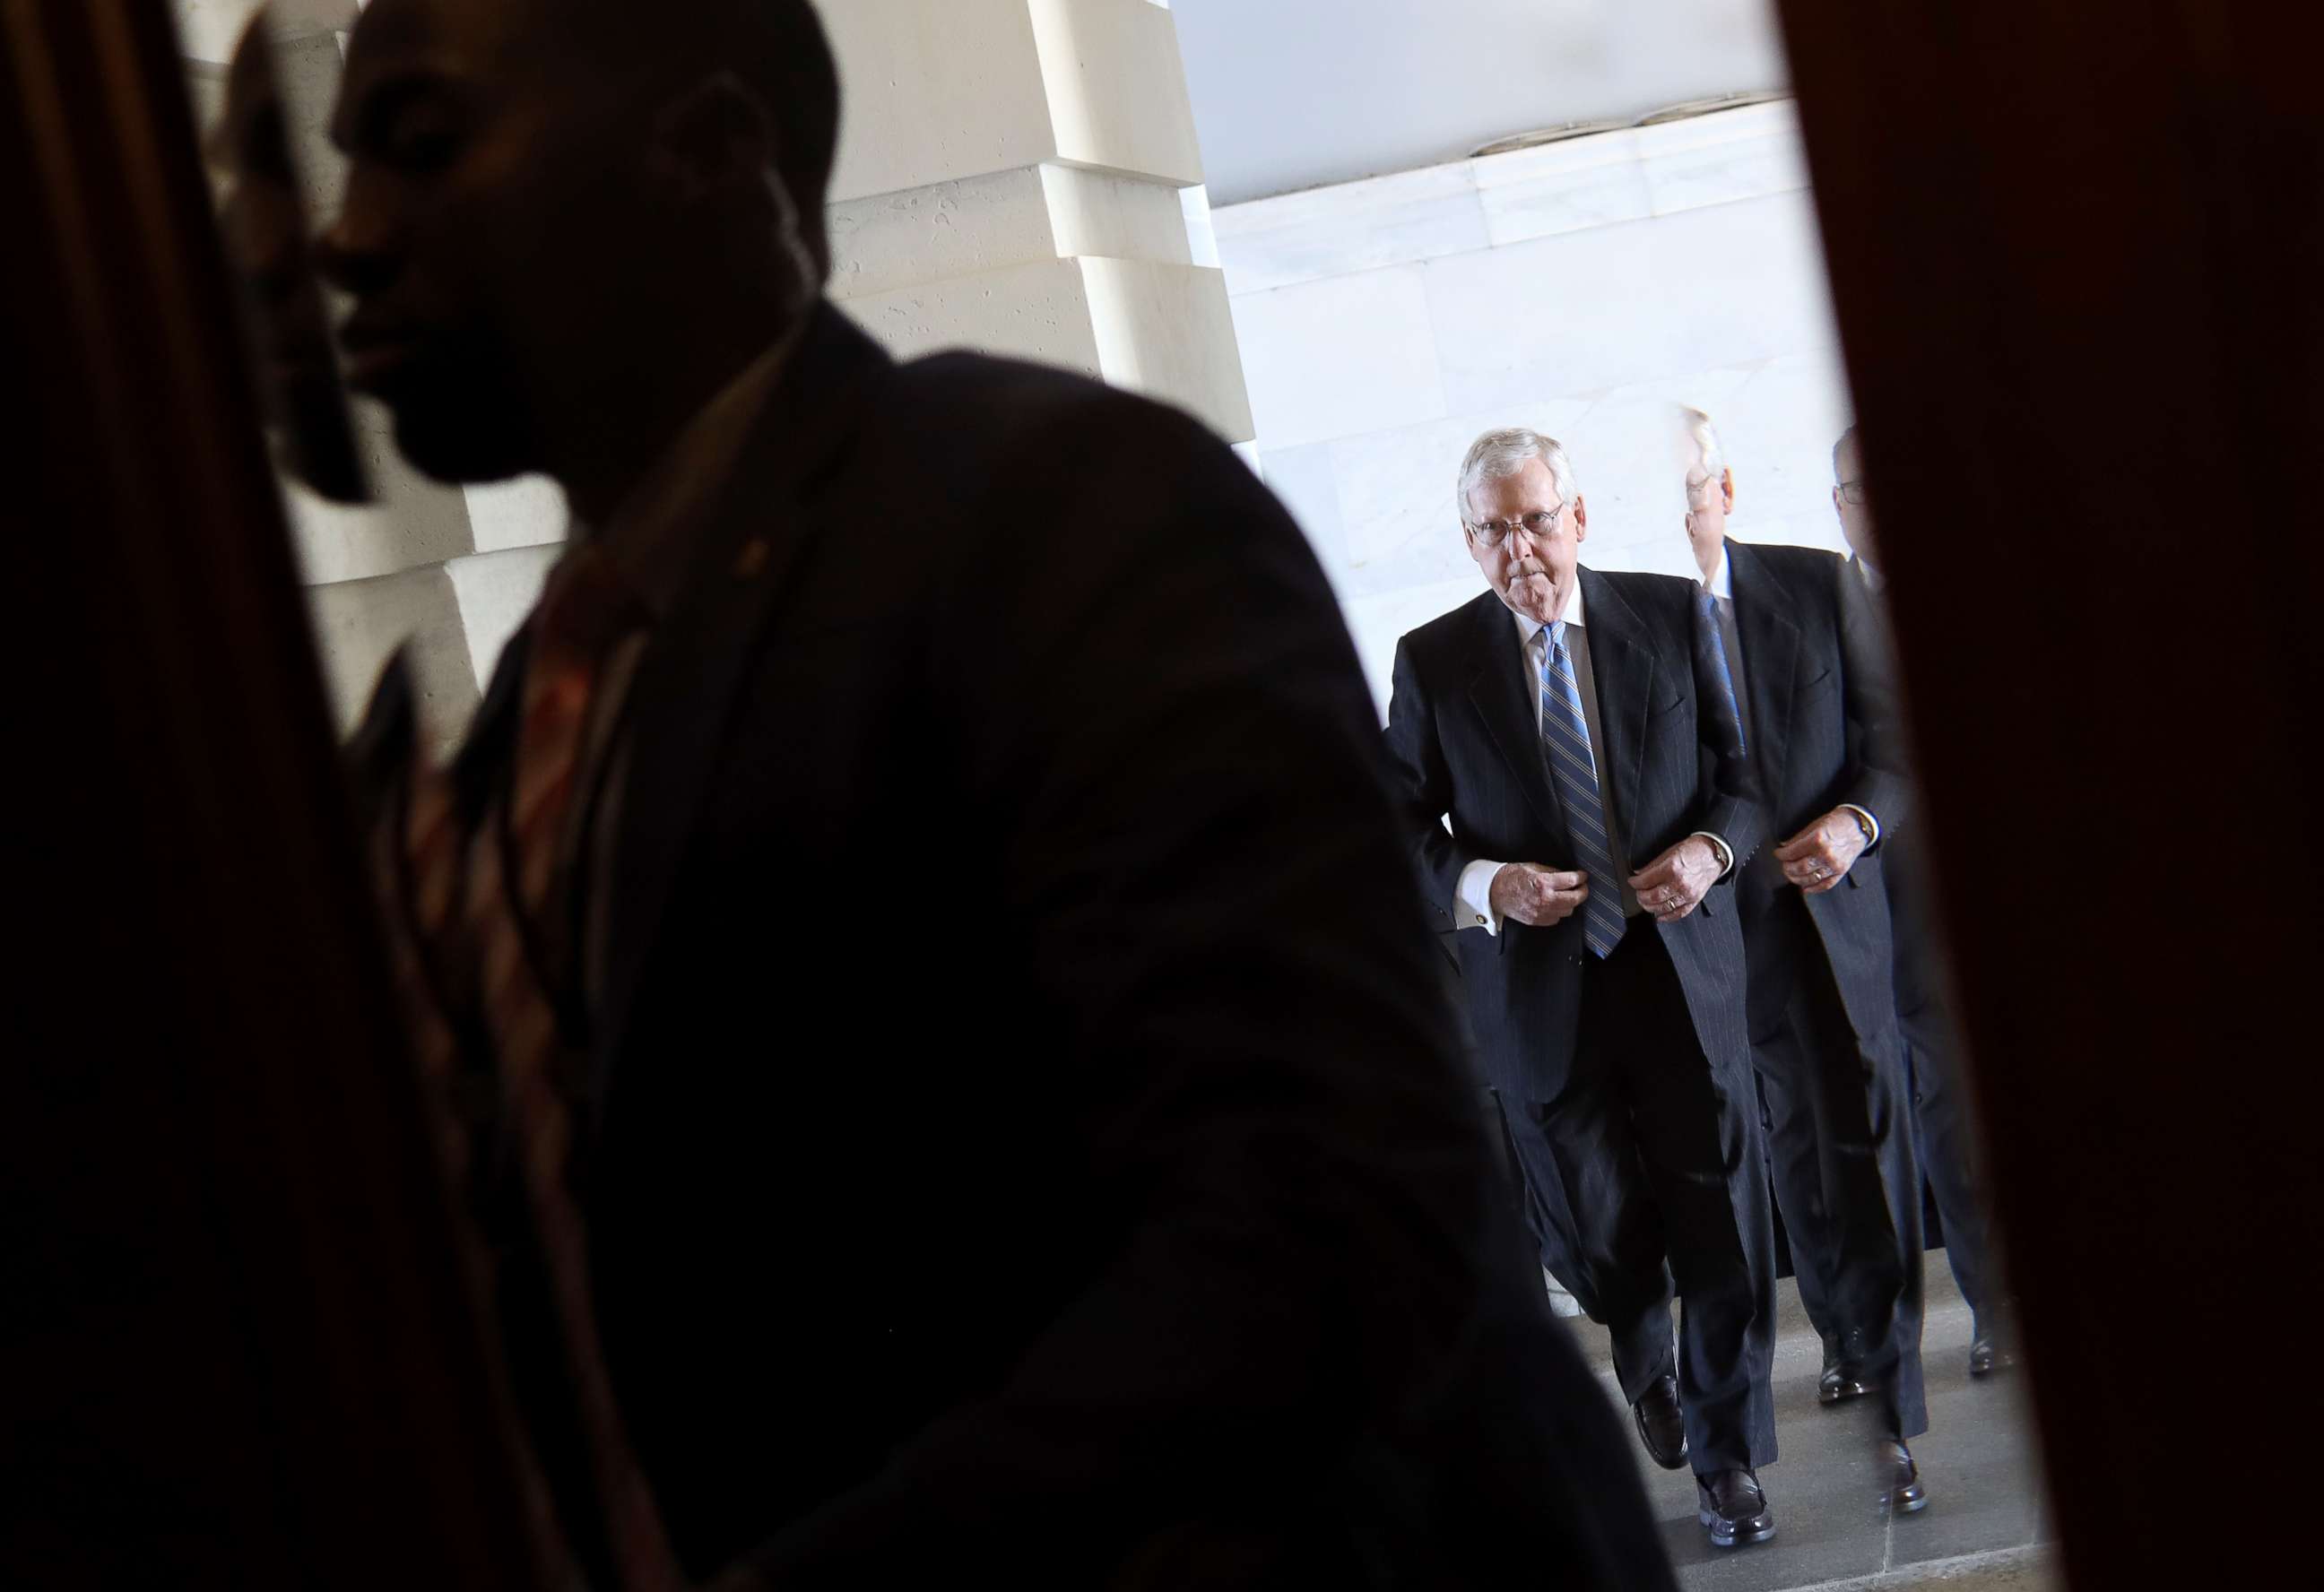 PHOTO: Senate Majority Leader Mitch McConnell arrives at the U.S. Capitol on March 18, 2020, in Washington.